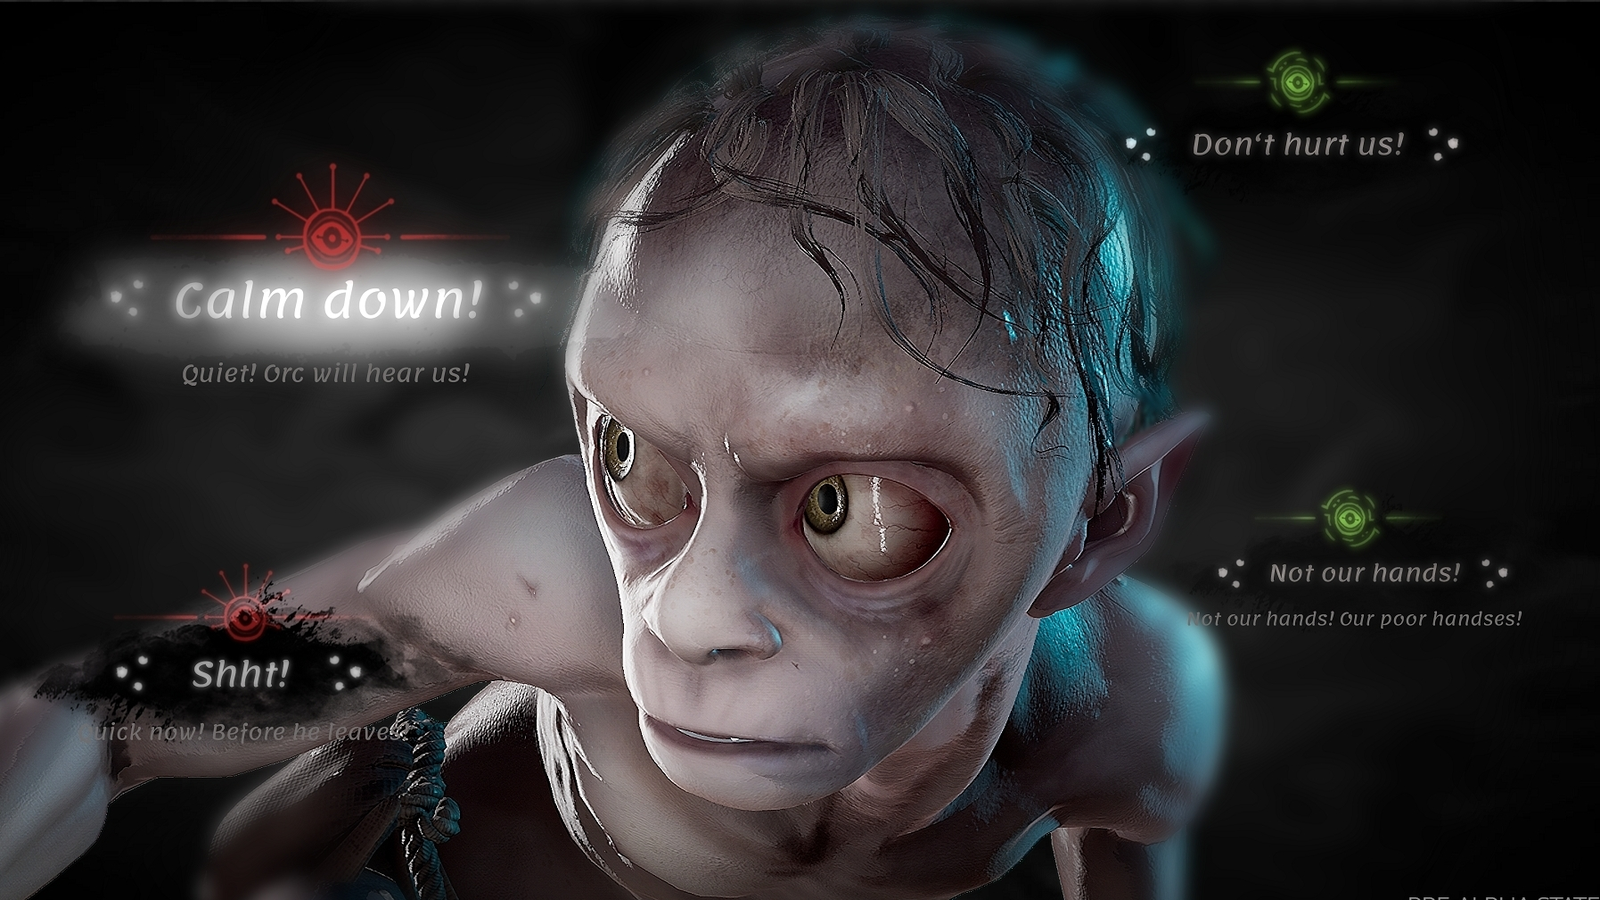 Here's your first look at The Lord of the Rings: Gollum gameplay - EGM